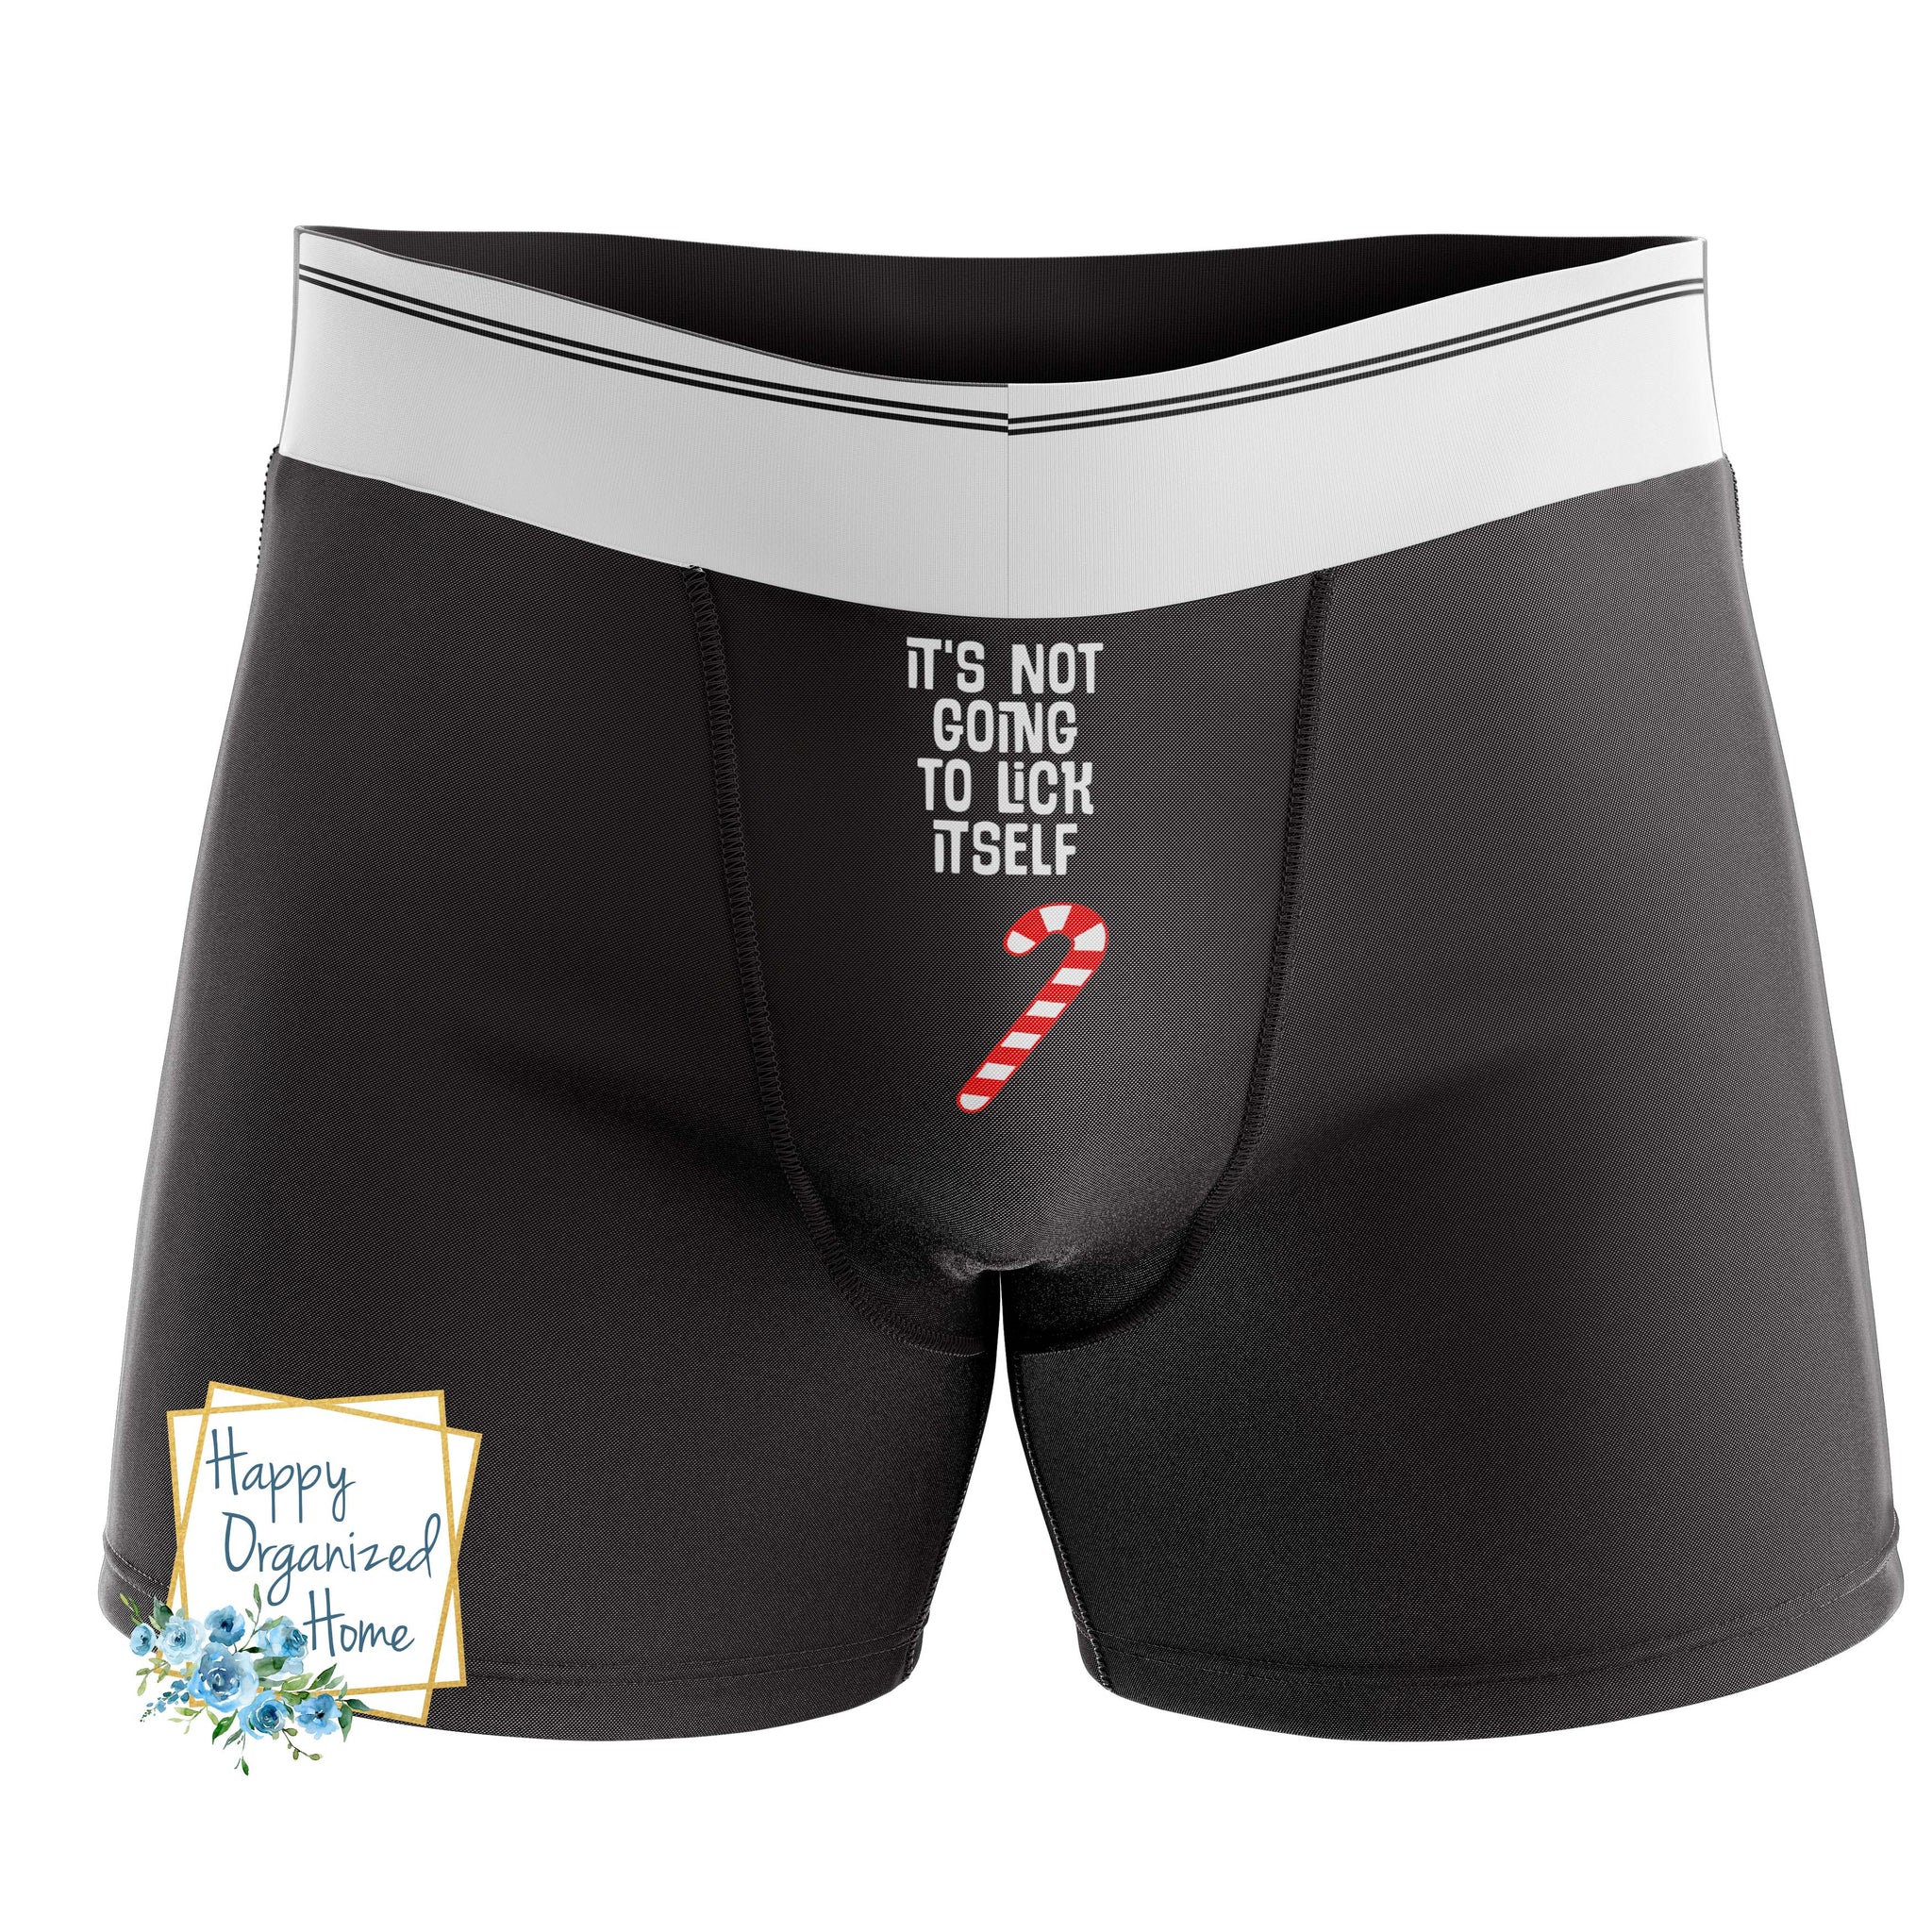 It's not going to lick itself Candy Cane -  Men's Naughty Boxer Briefs